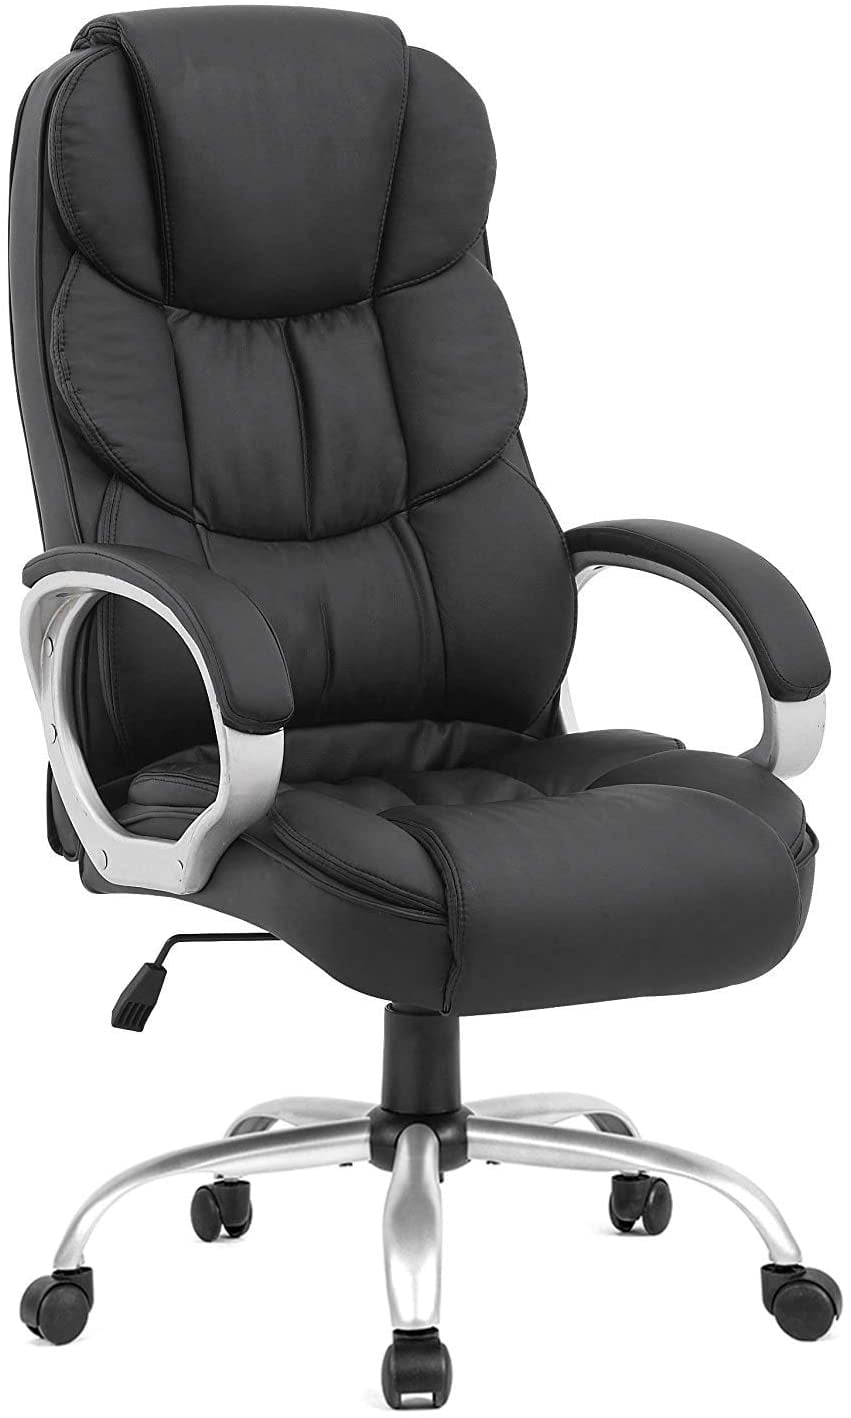 Ergonomic Office Chair Desk Chair Computer Chair with ...